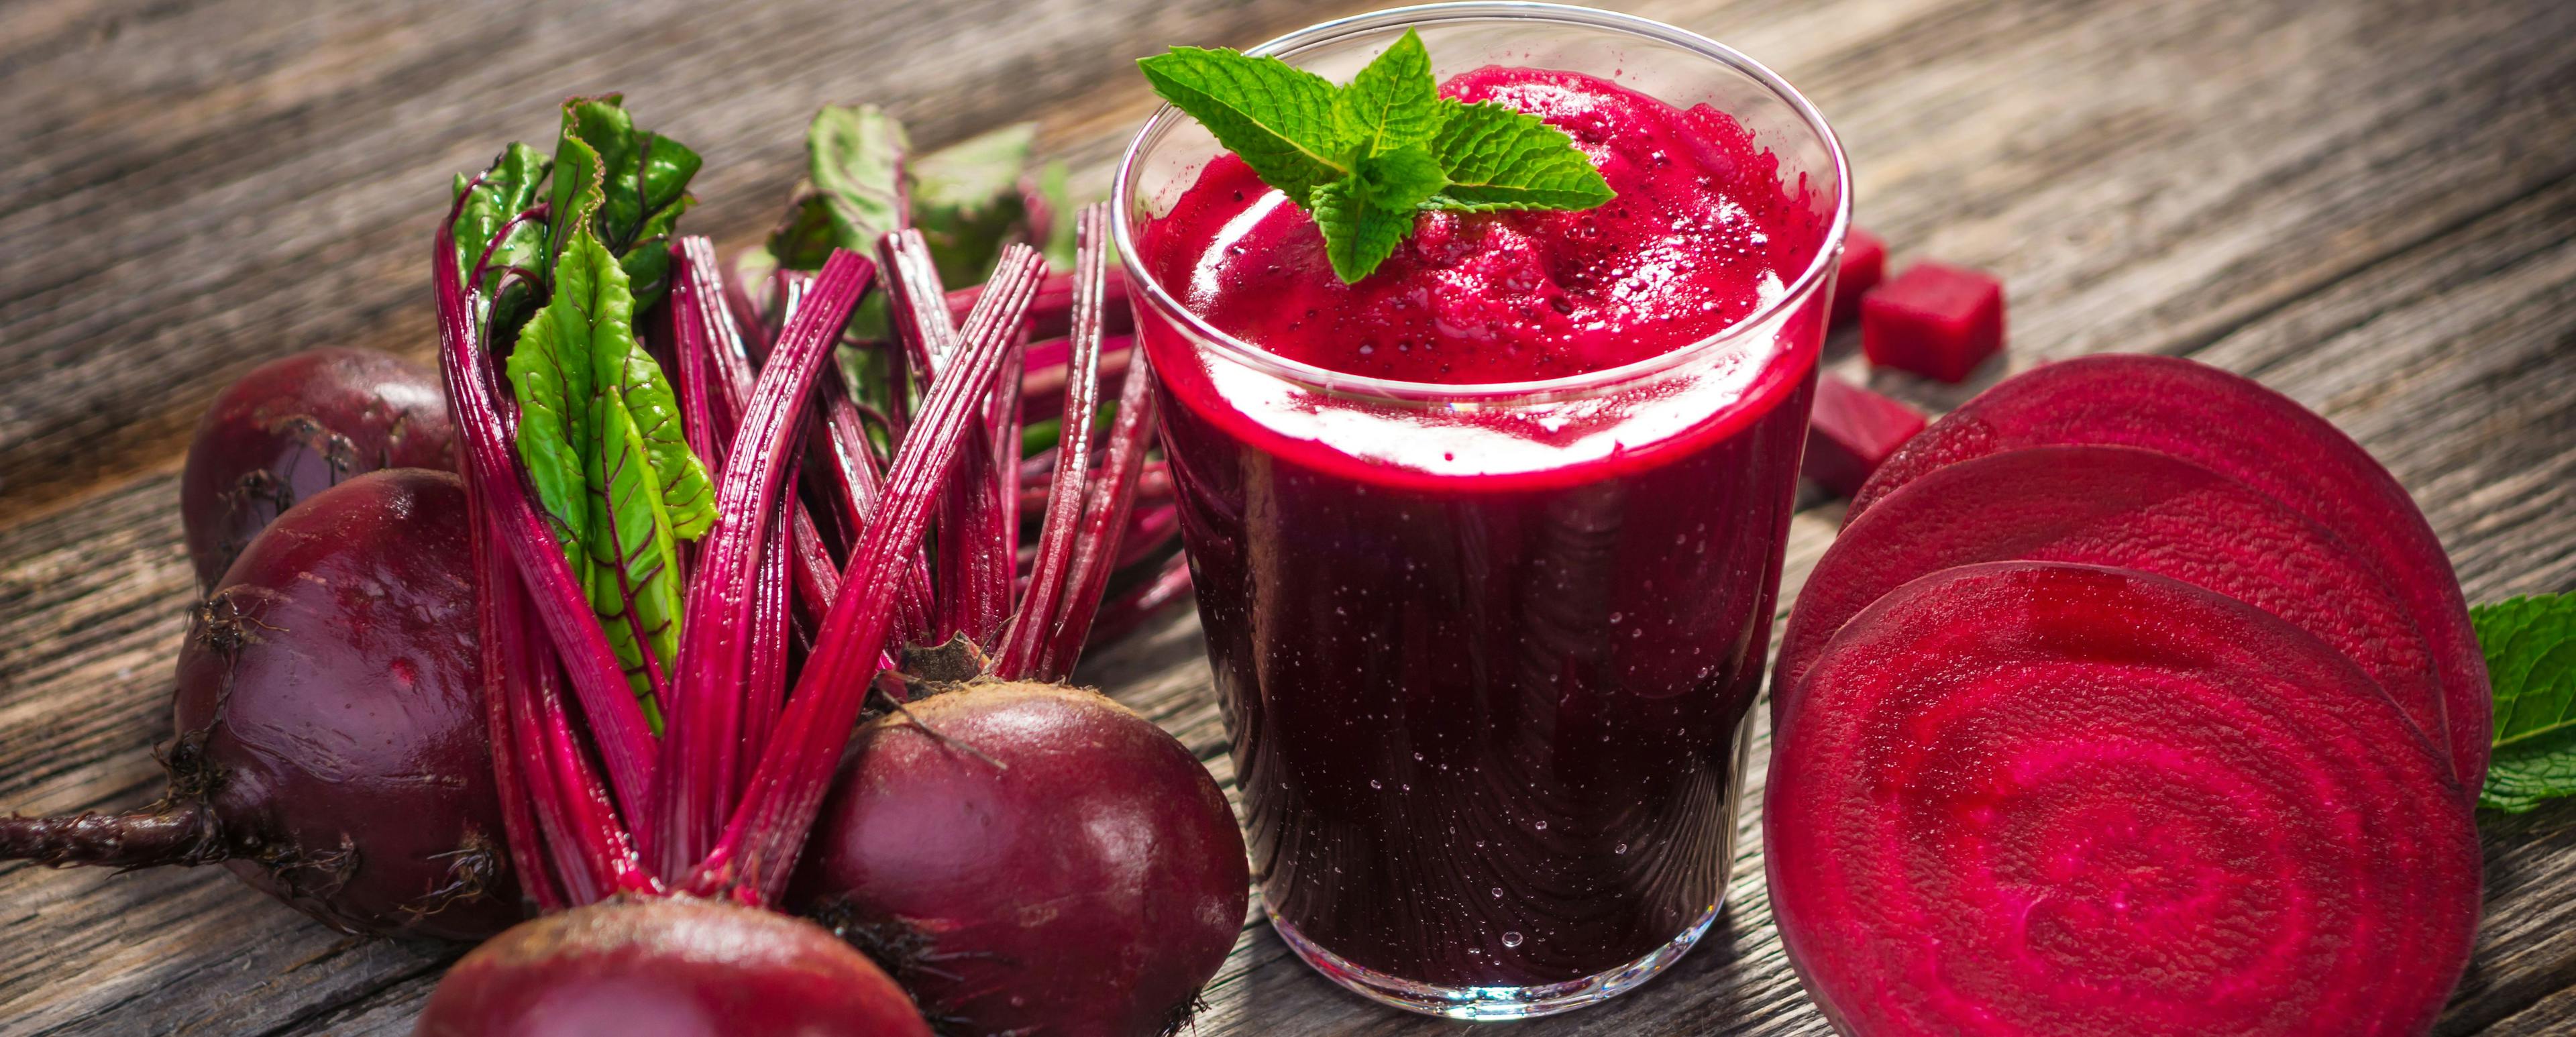 Beetroot Juice Extends COPD Patients' Exercise Capacity